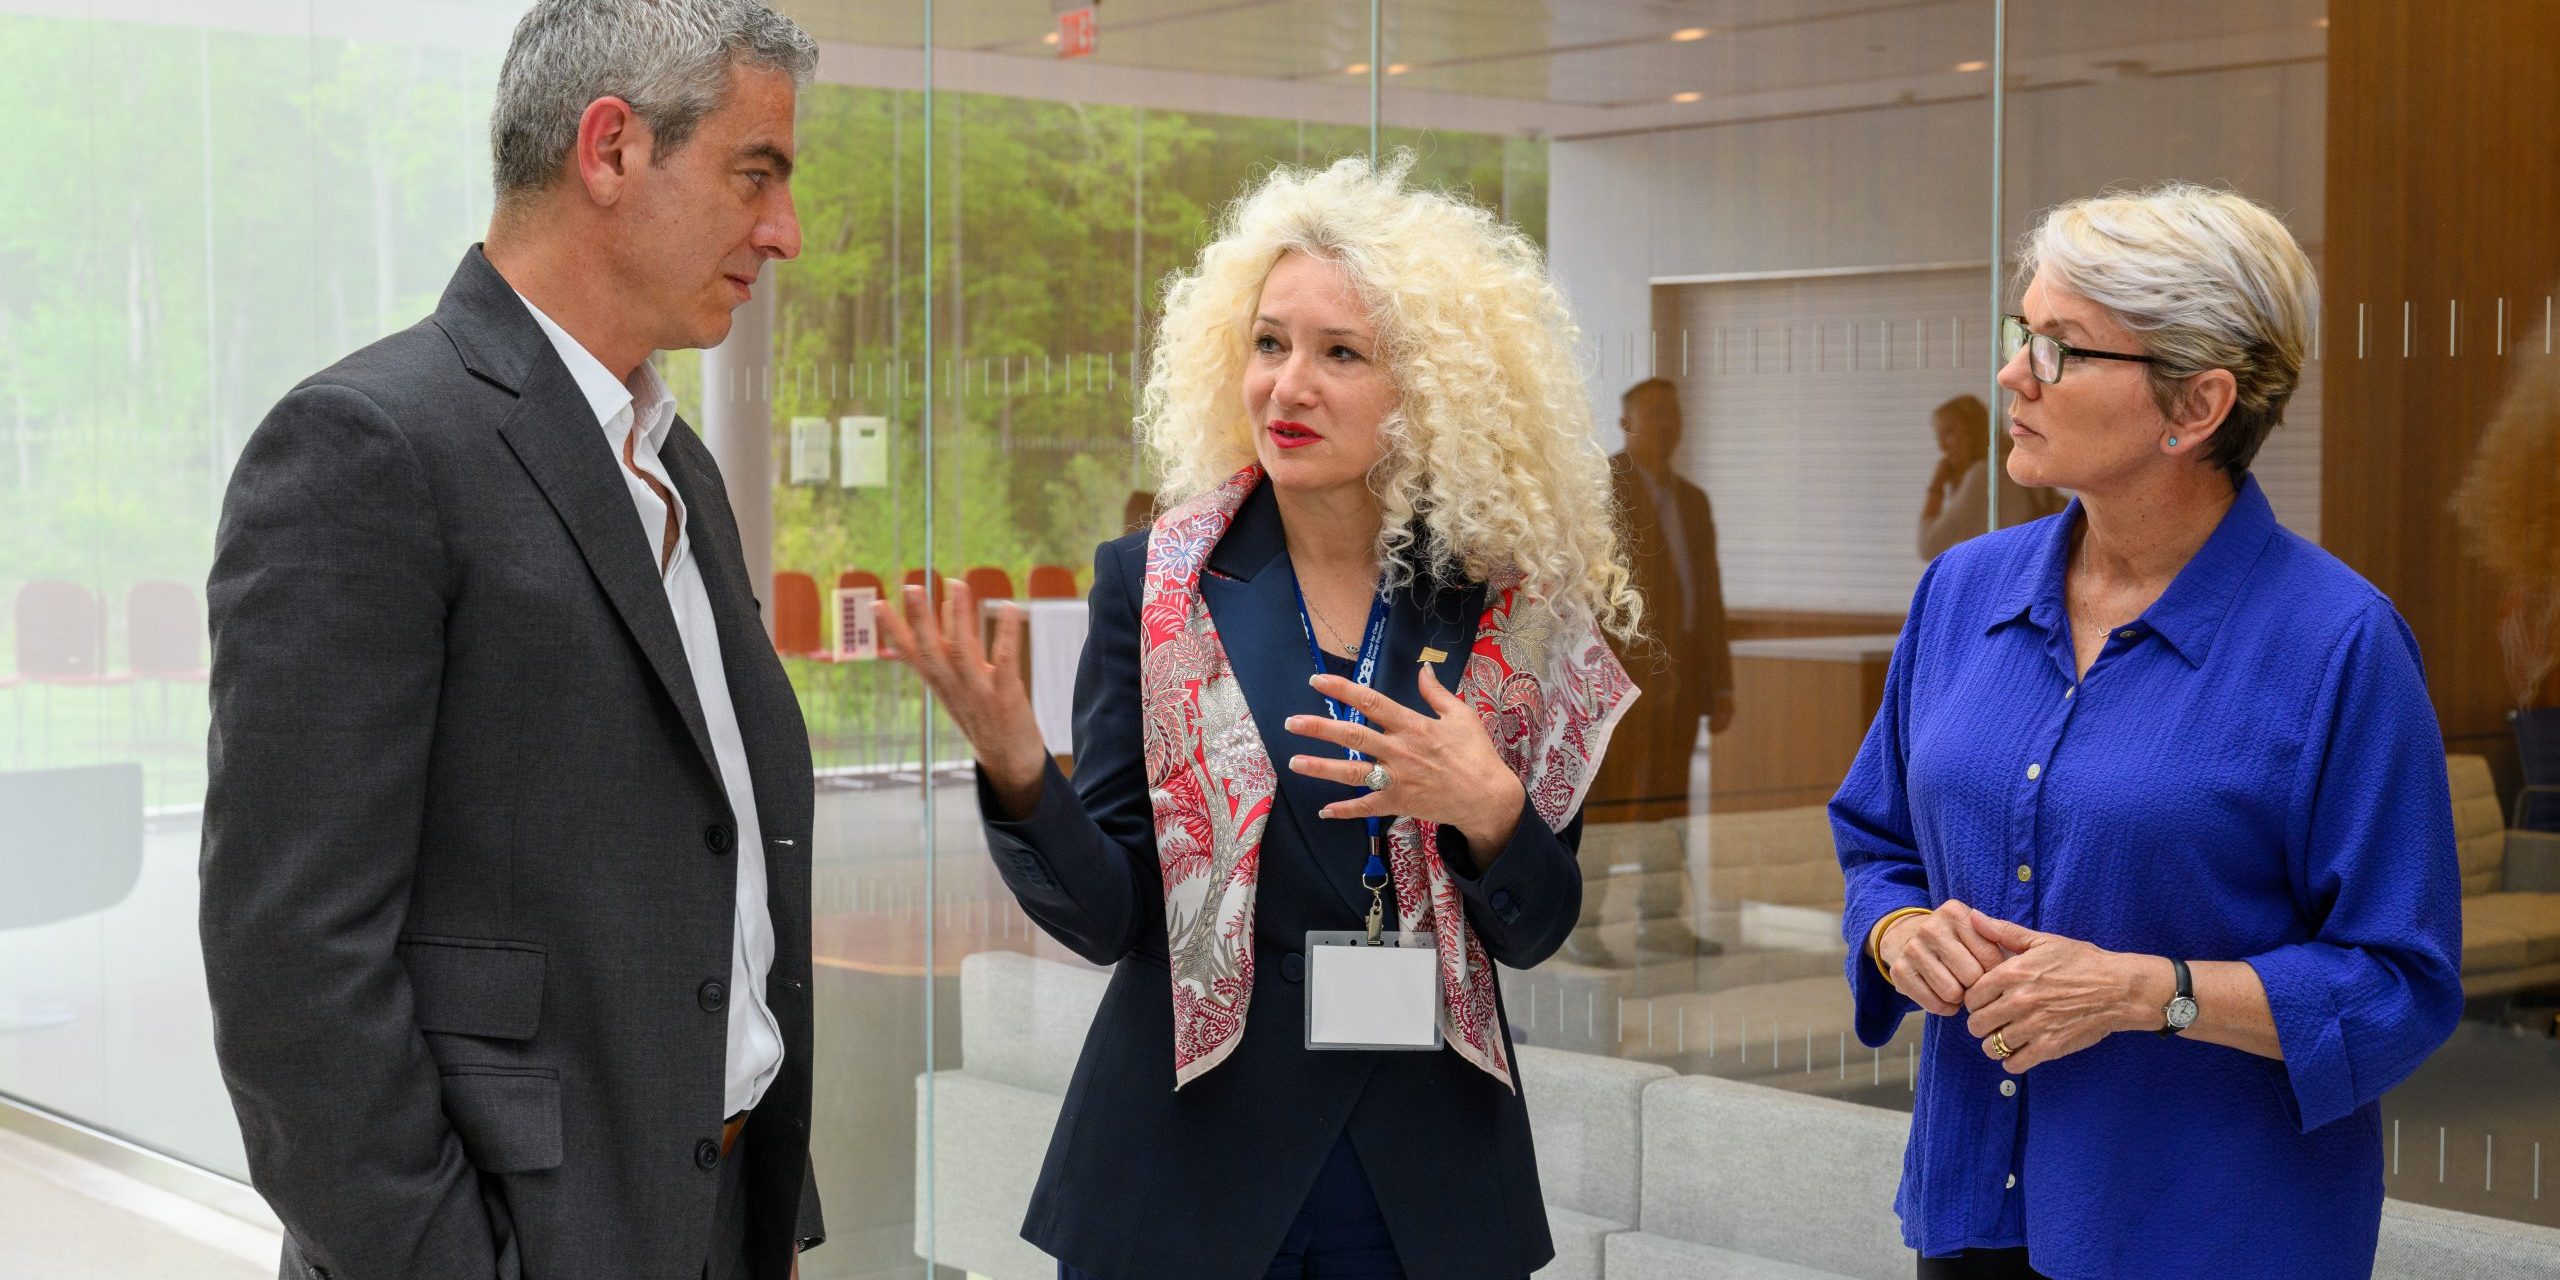 Radenka Maric, center, interim president, speaks with U.S. Secretary of Energy Jennifer Granholm, right, and George Bollas, director, institute for advanced systems engineering, on a visit to the Innovation Partnership Building